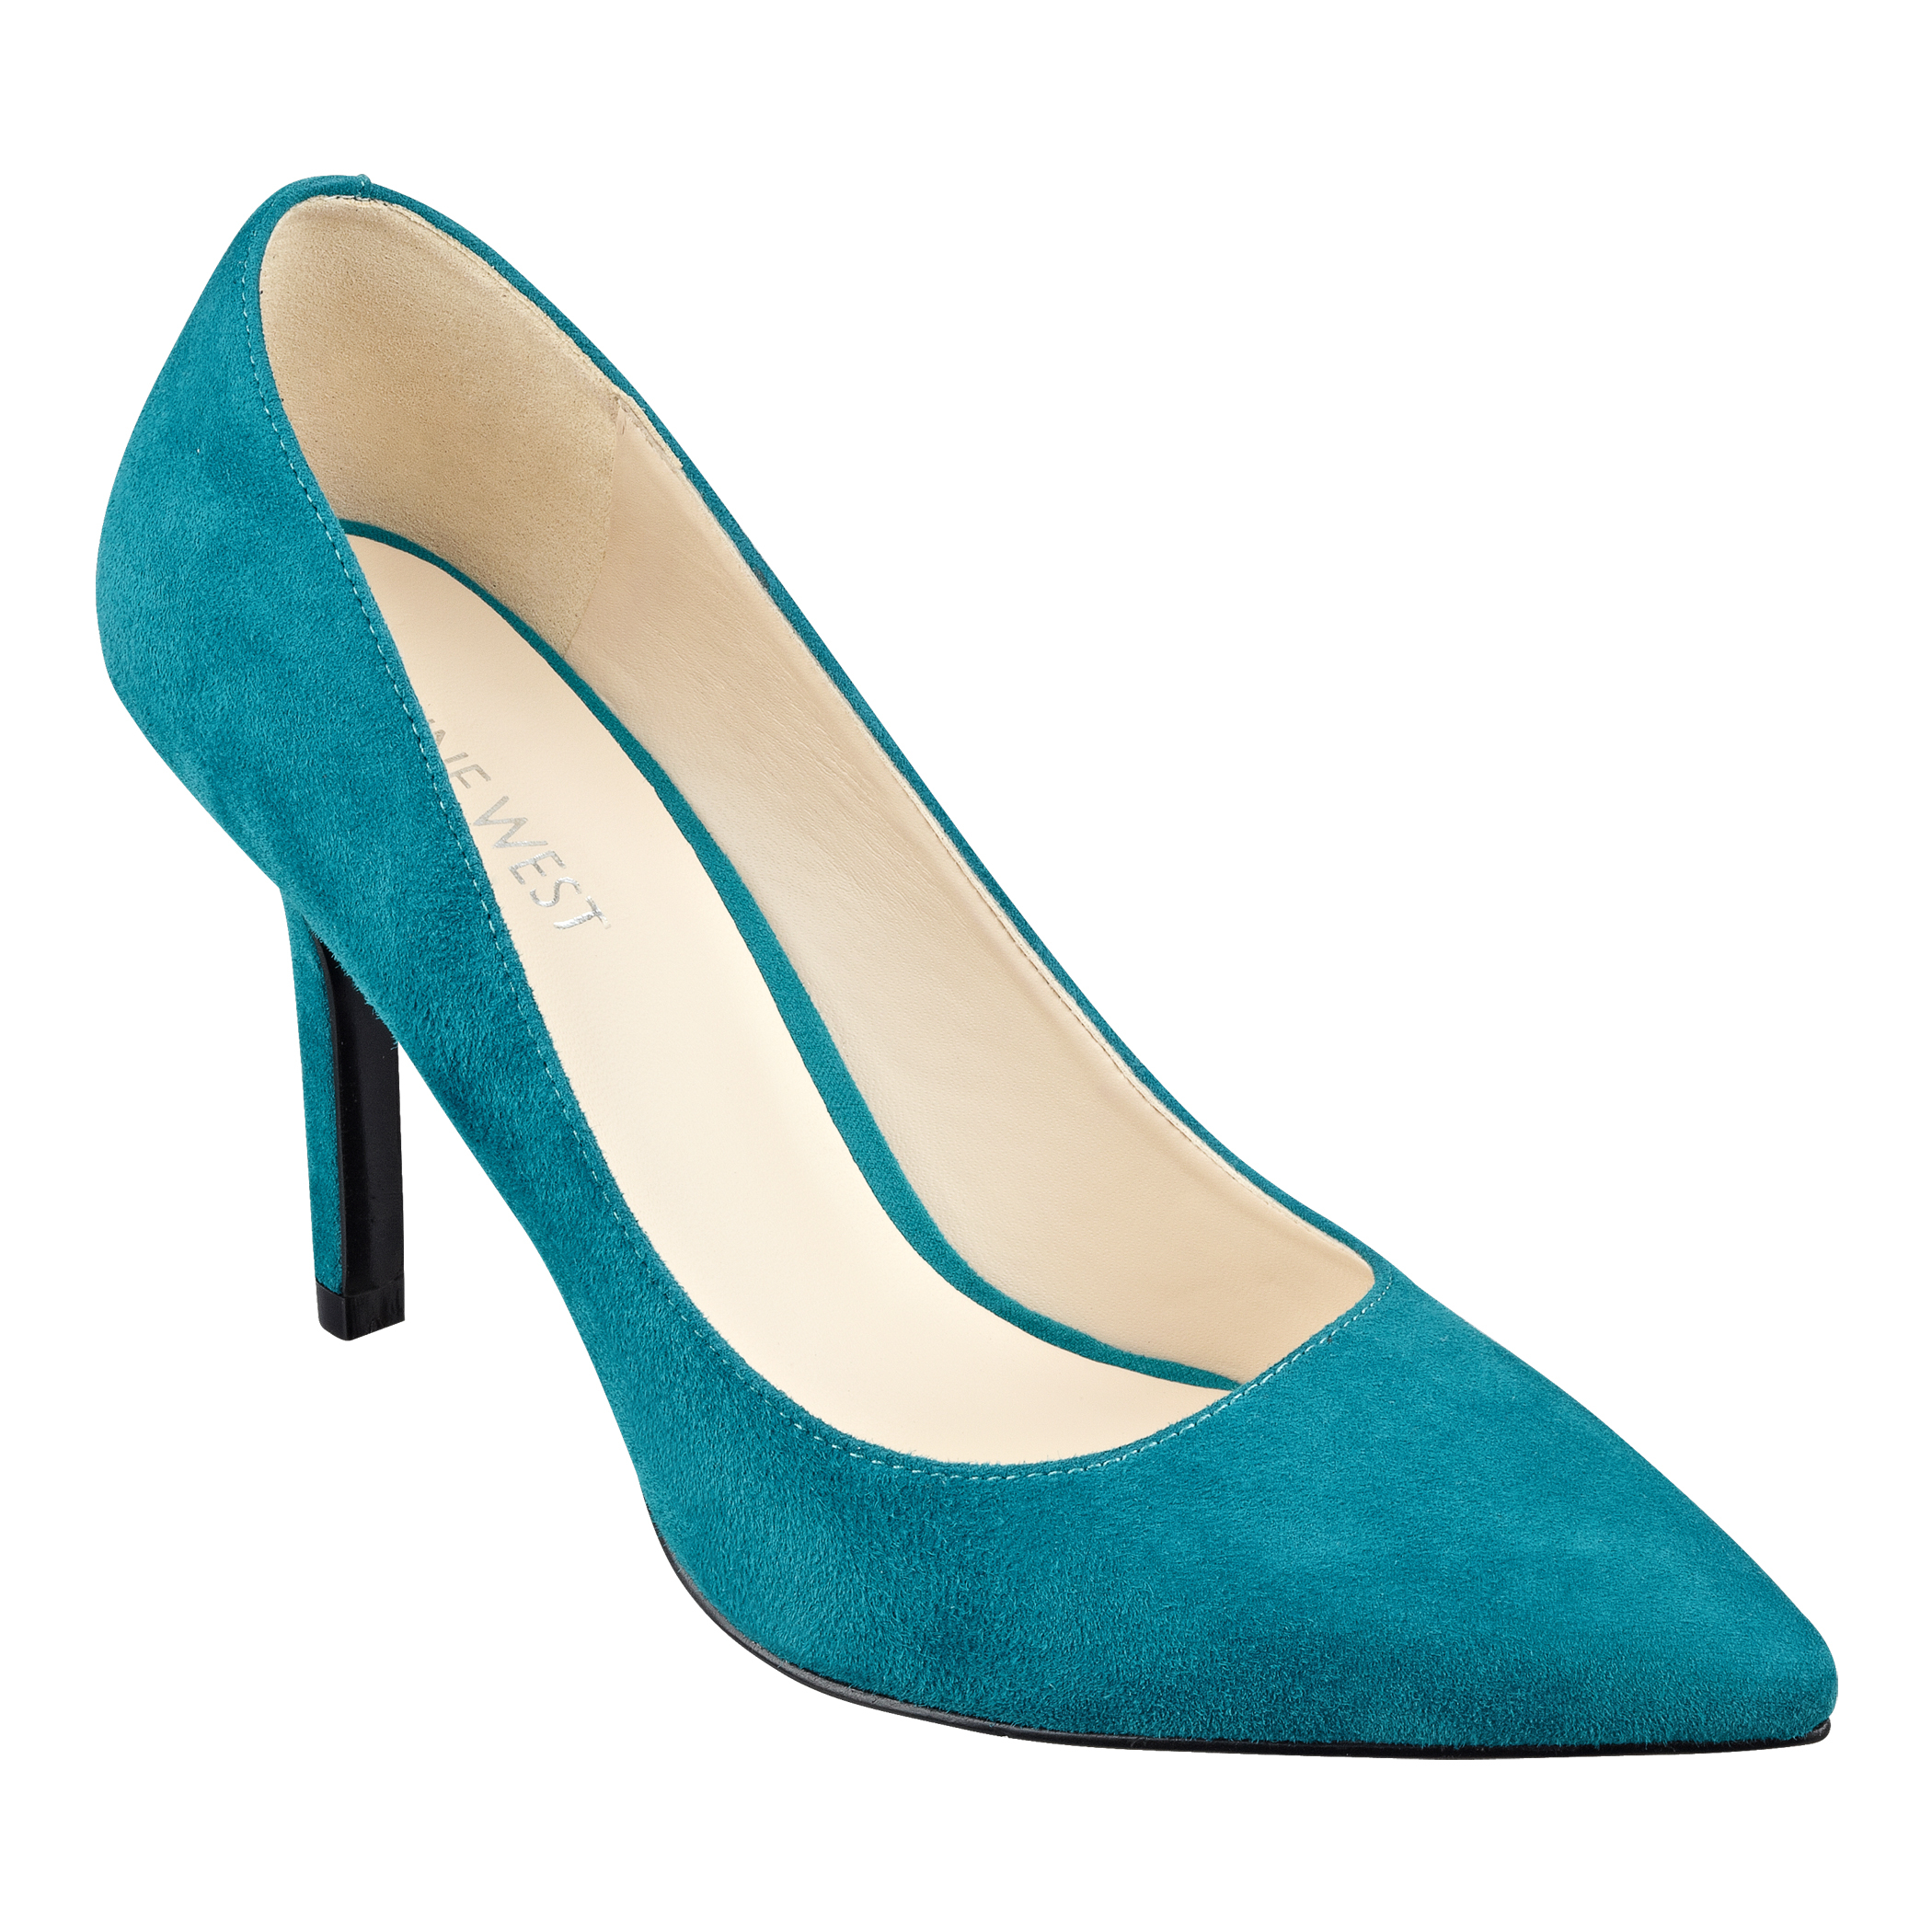 Nine west Martina Pointed Toe Pumps in Blue | Lyst